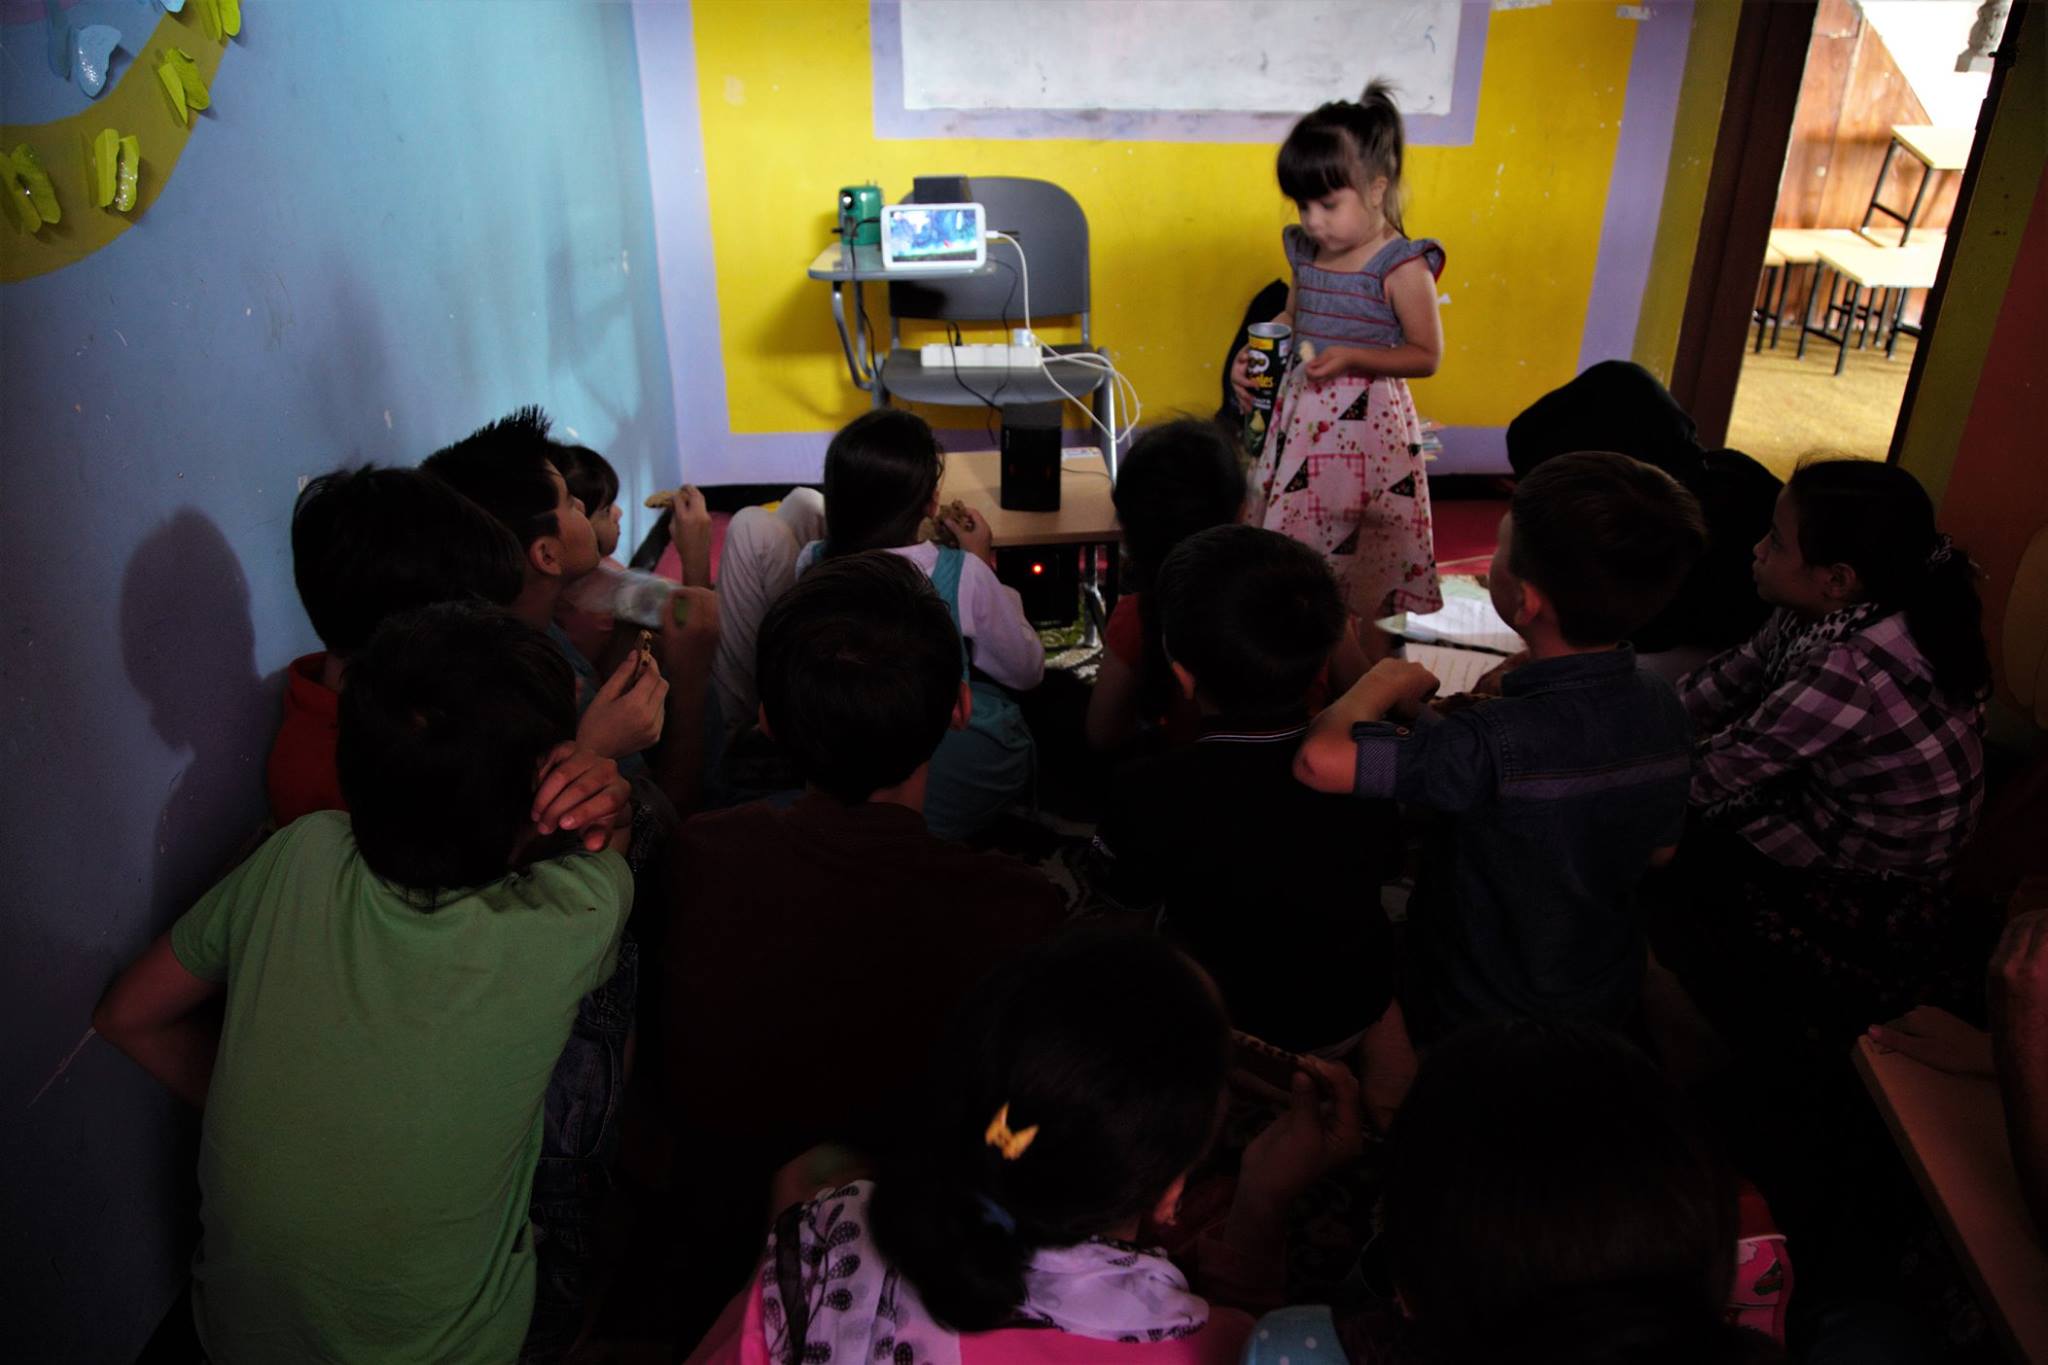  Our teachers, with limited resources, offered their tablets to be used as screen educational materials for the students. Looks like a mini cinema, even Natiqa enjoyed these sessions with older kids. 